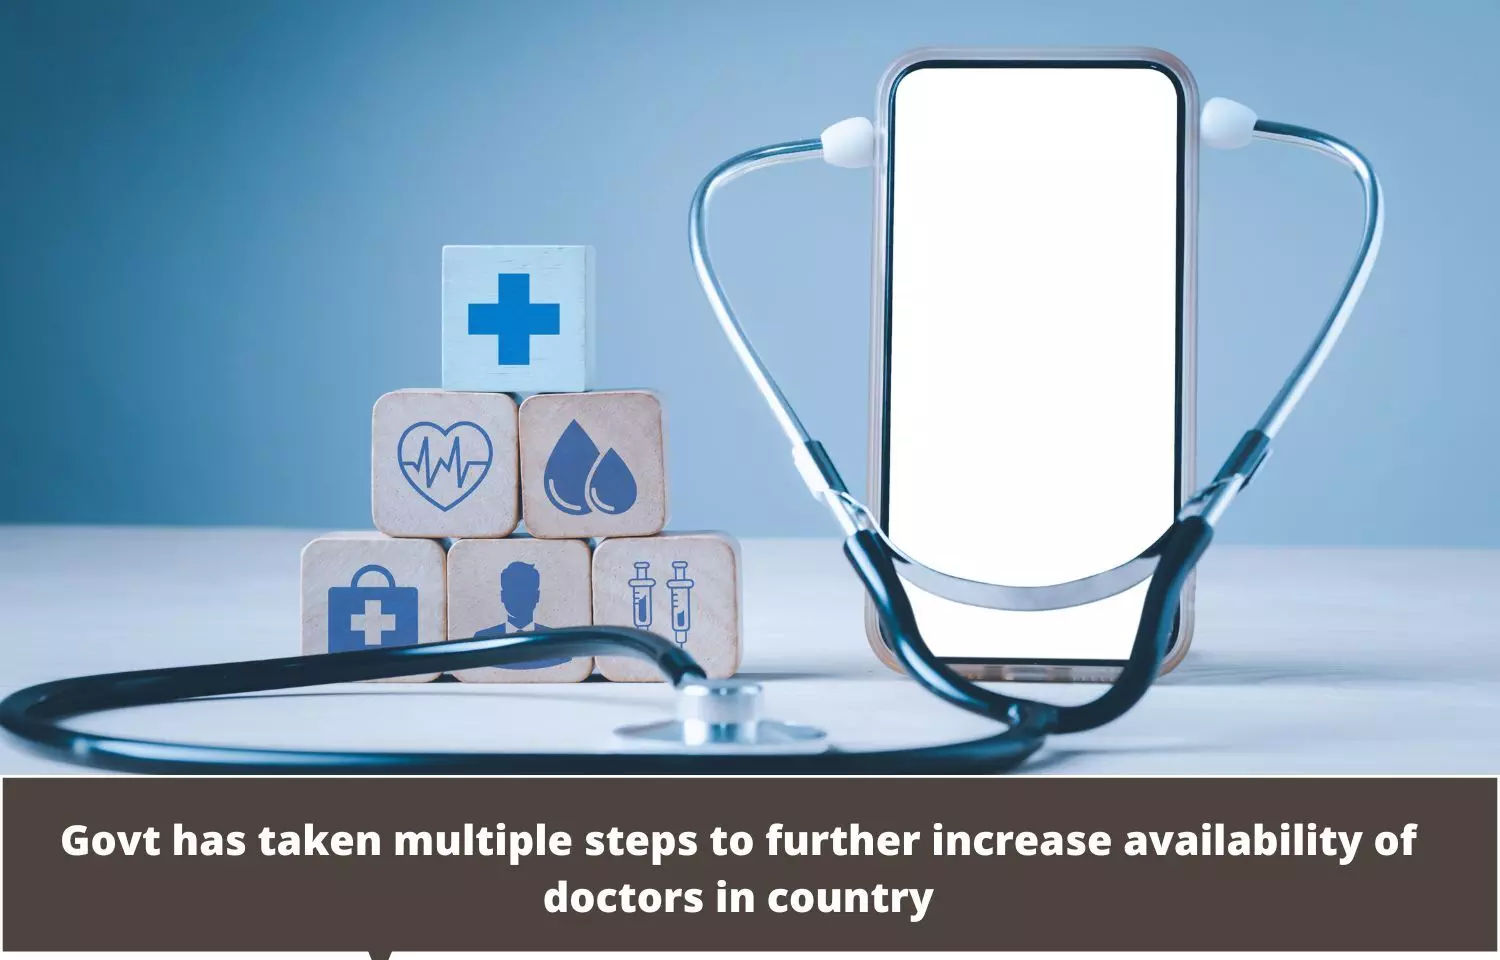 Govt has taken multiple steps to further increase availability of doctors in country